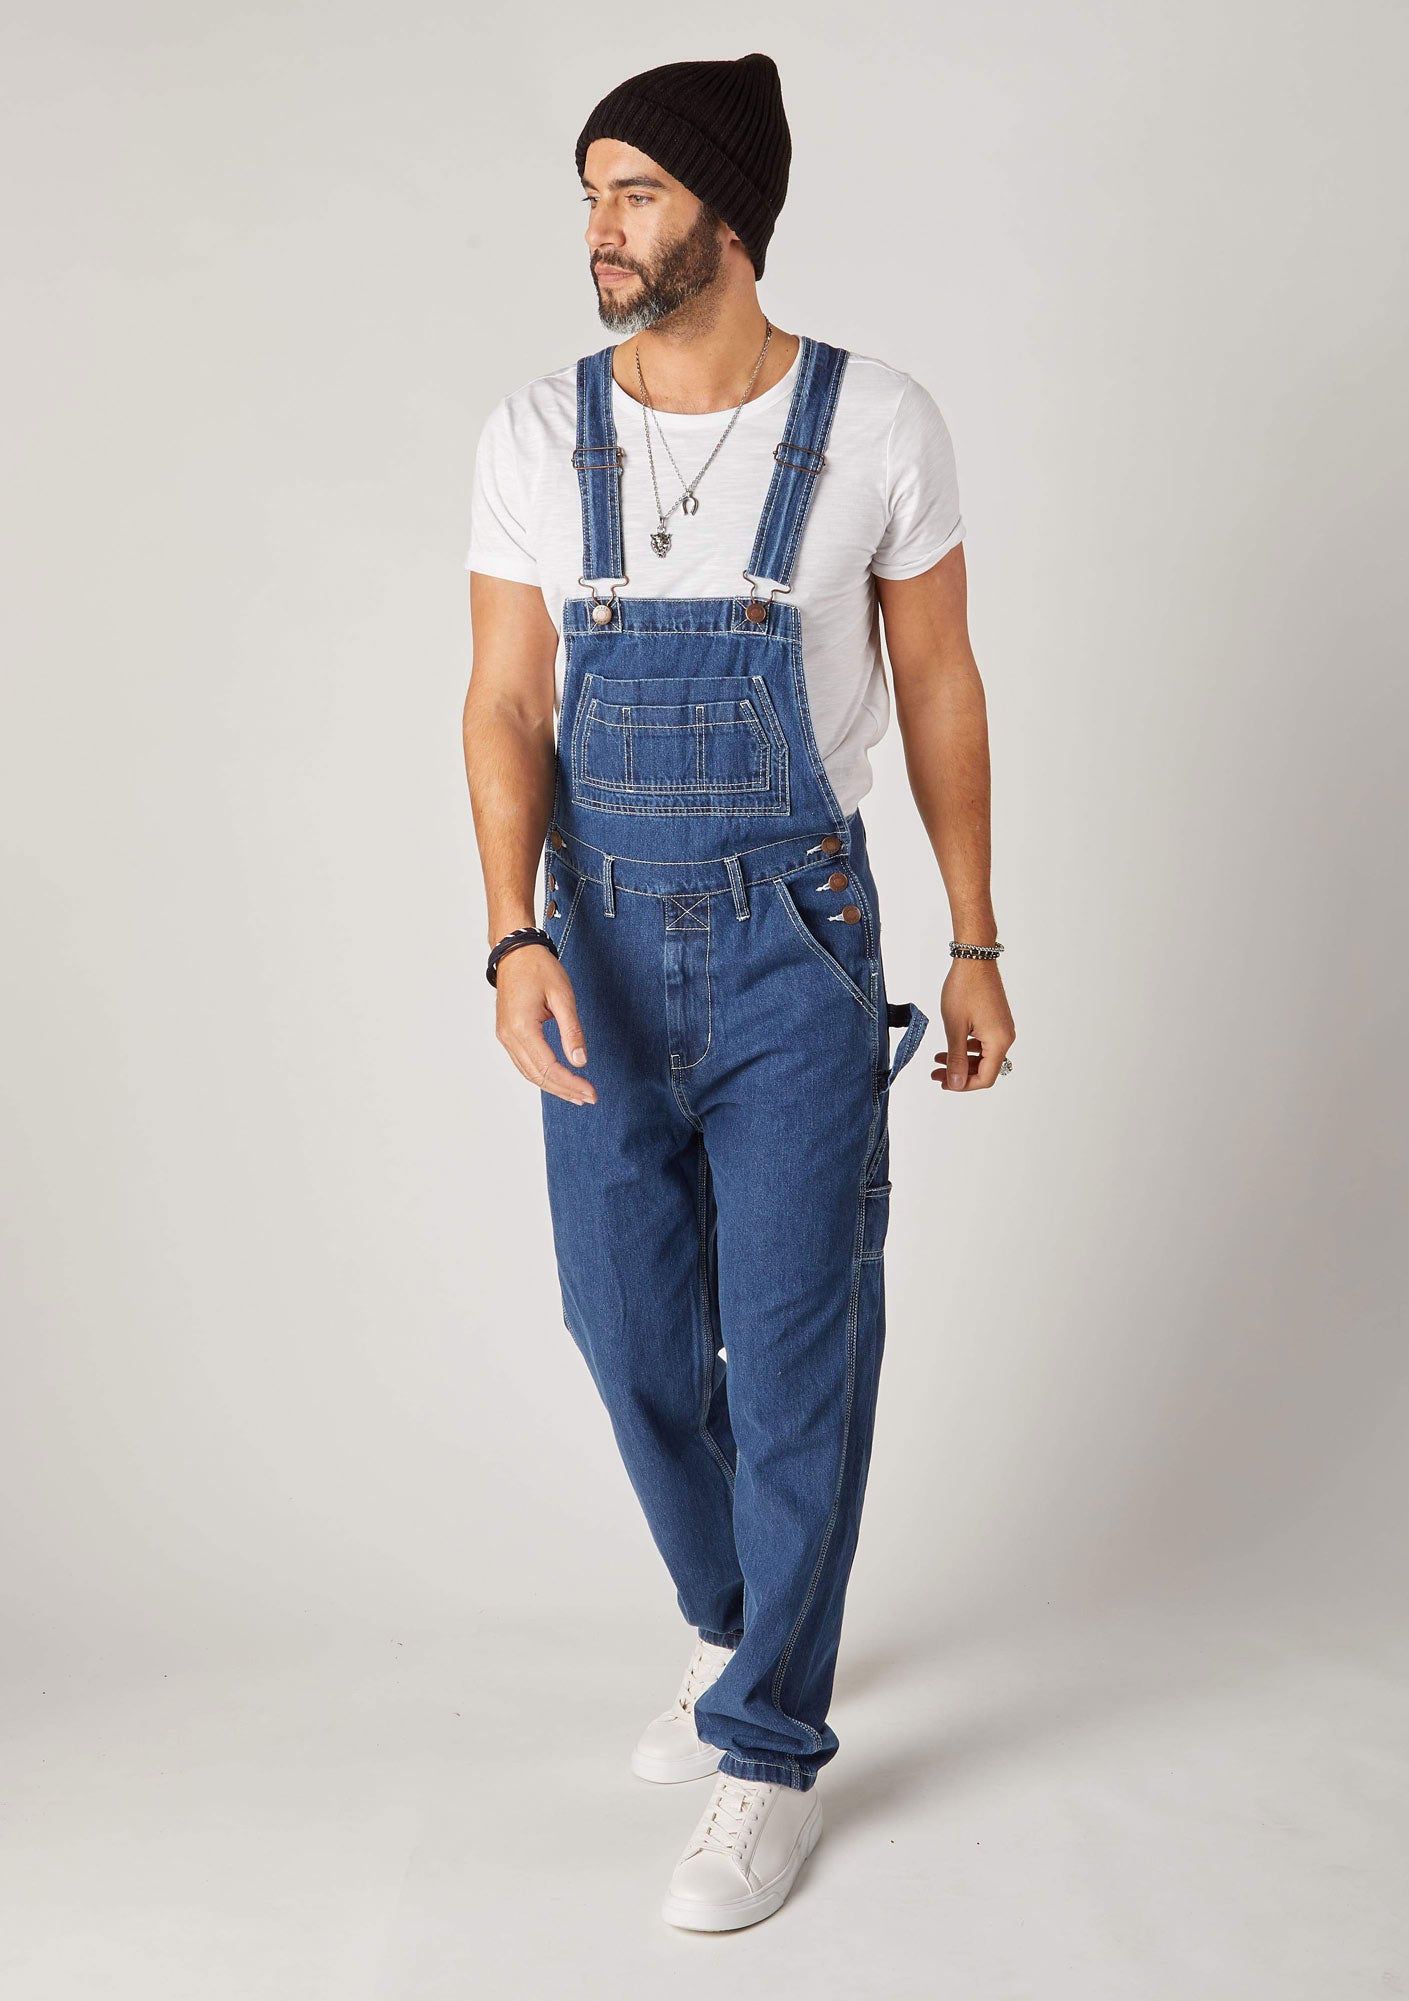 Front pose looking to left wearing loose fitting, stonewash denim bib overalls with view of bib and front pockets and adjustable straps.